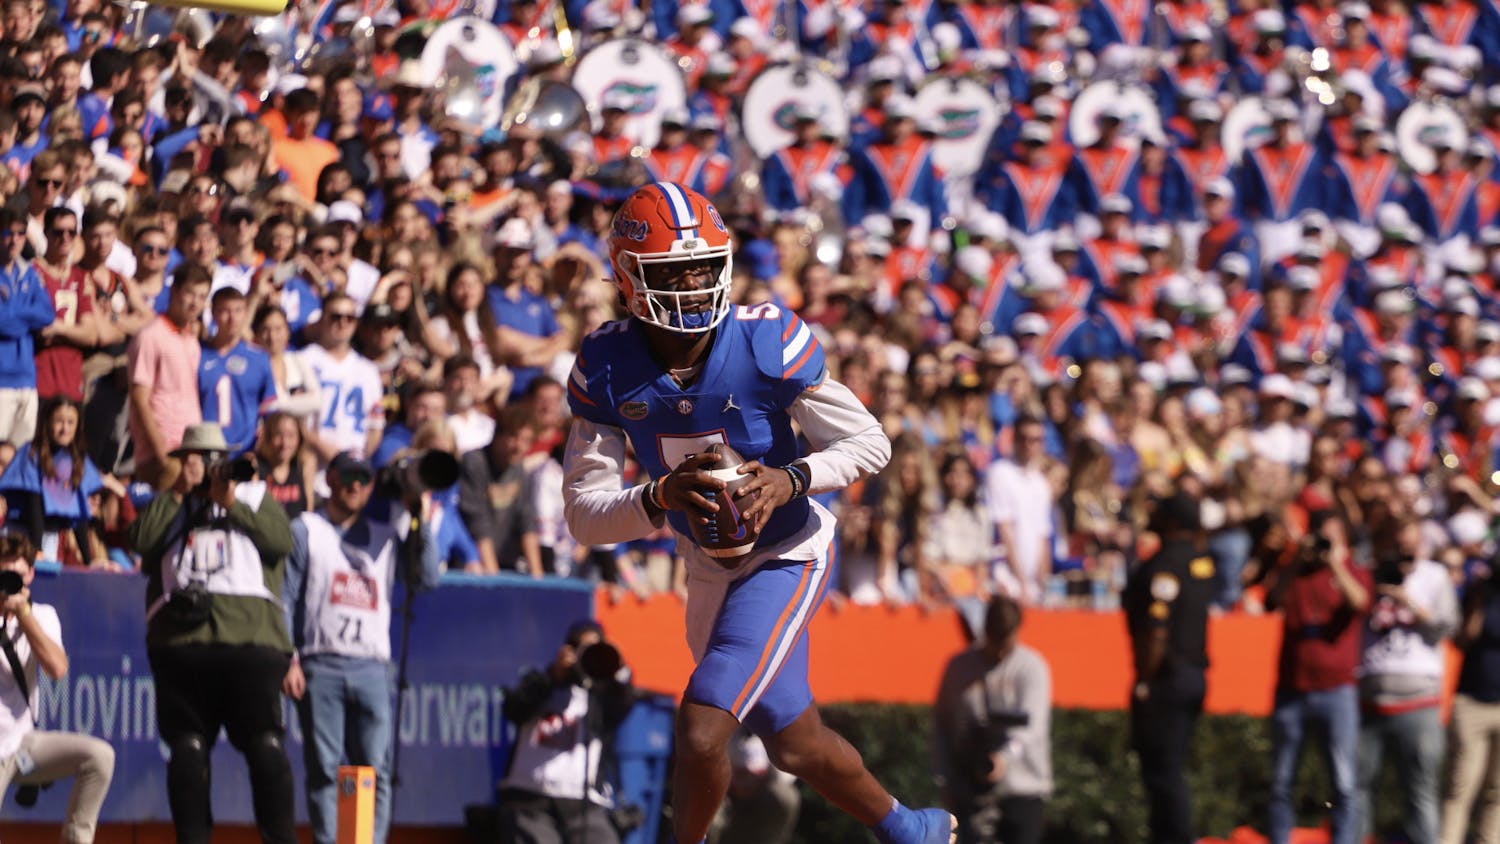 Florida quarterback Emory Jones pictured during a game against Florida State. He announced his transfer to Arizona State Thursday.